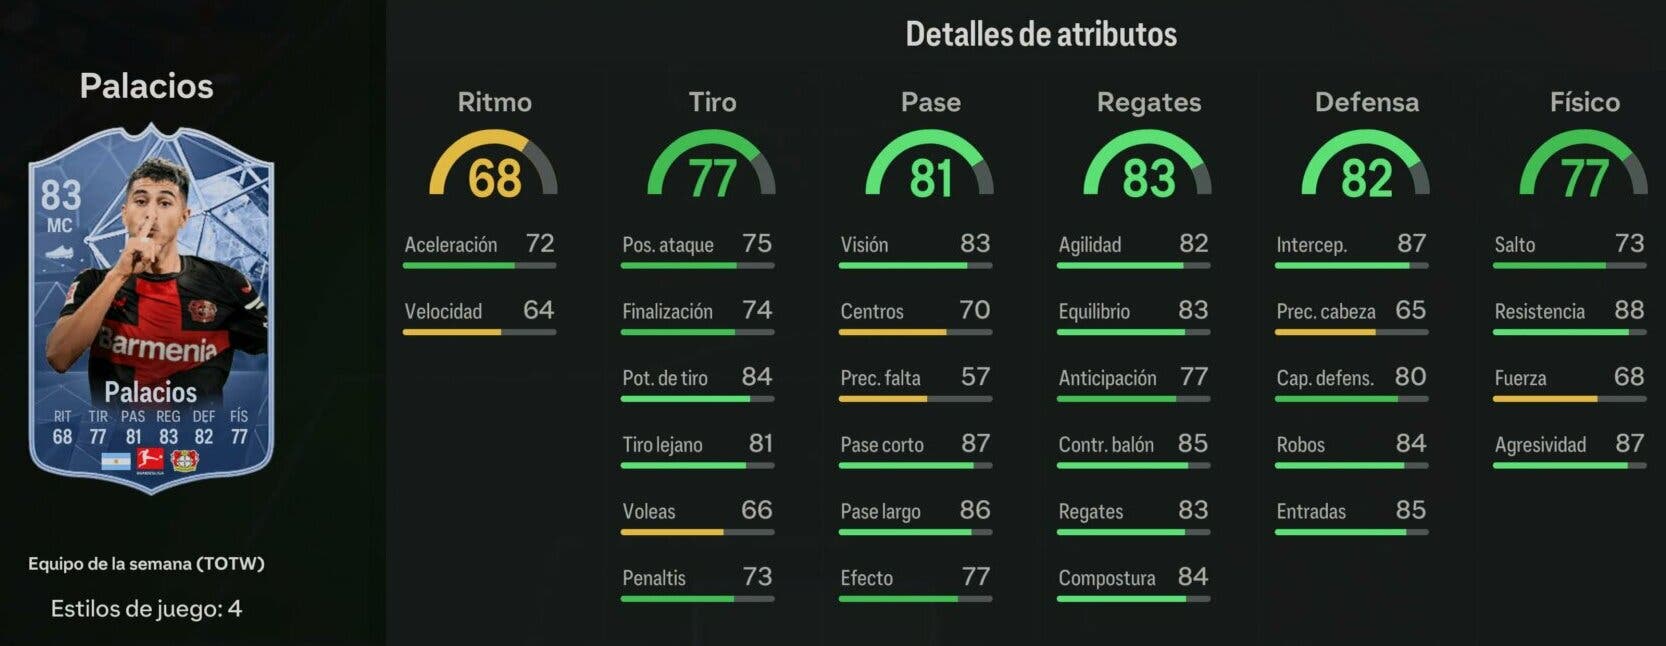 🚨Palacios🇦🇷 is added to come as OBJECTIVE during TRAILBLAZERS